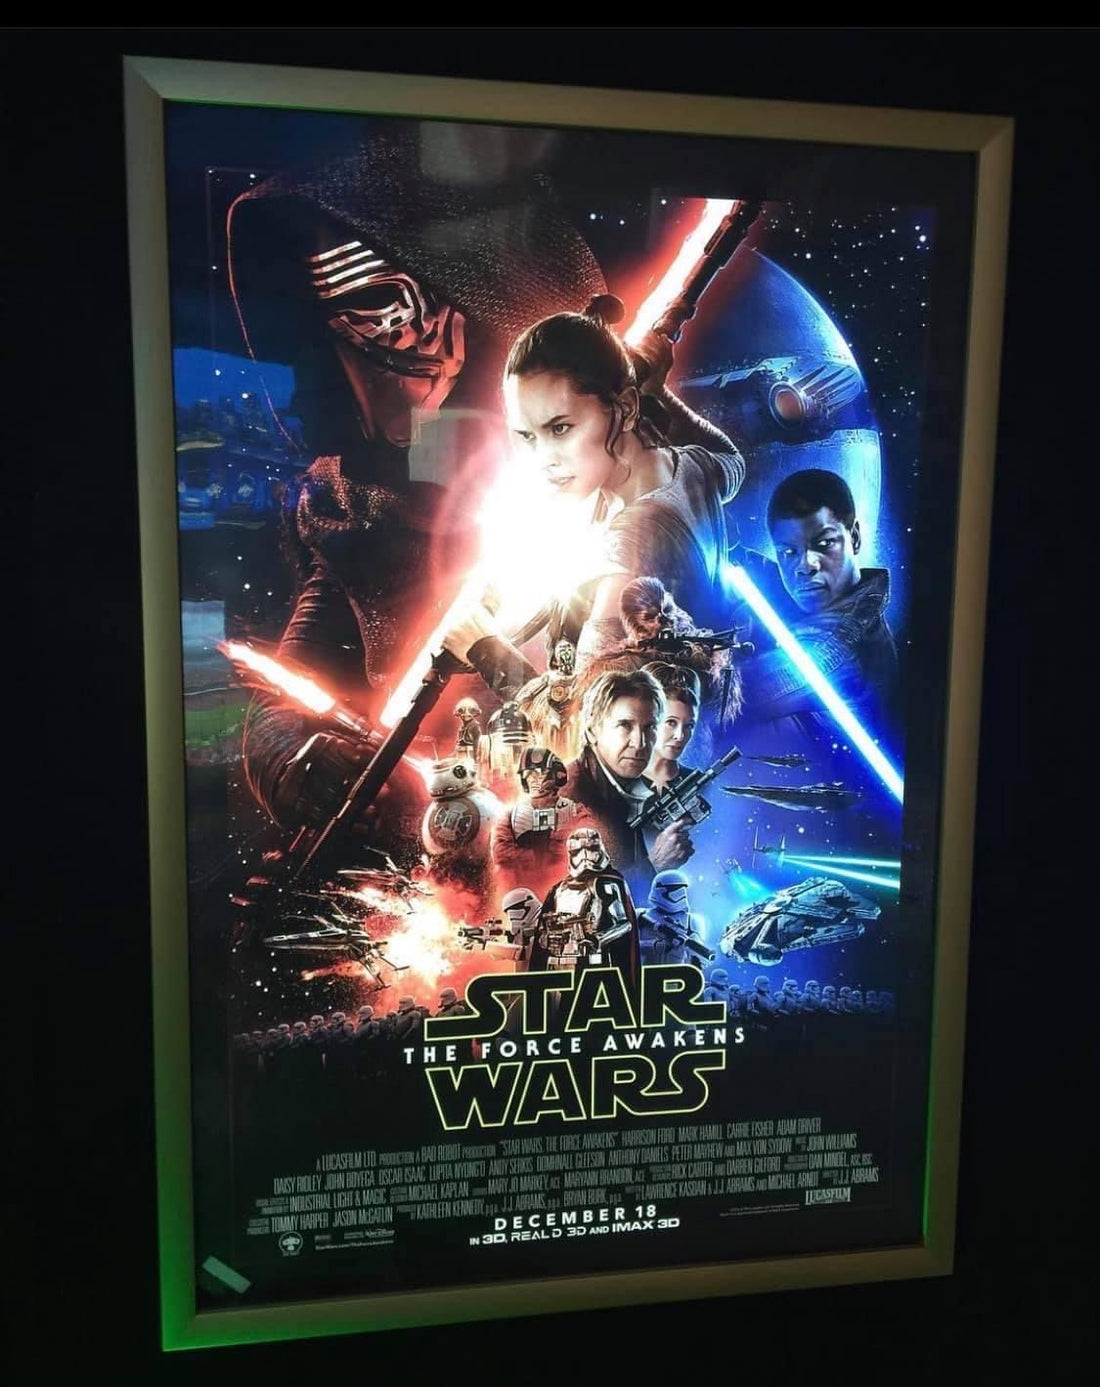 Punt Sceptisch cliënt LED Light Box Poster Frames for Home Theaters & Business Decor. Edgelit  your movie posters at Glowbox. – Glowbox LLC